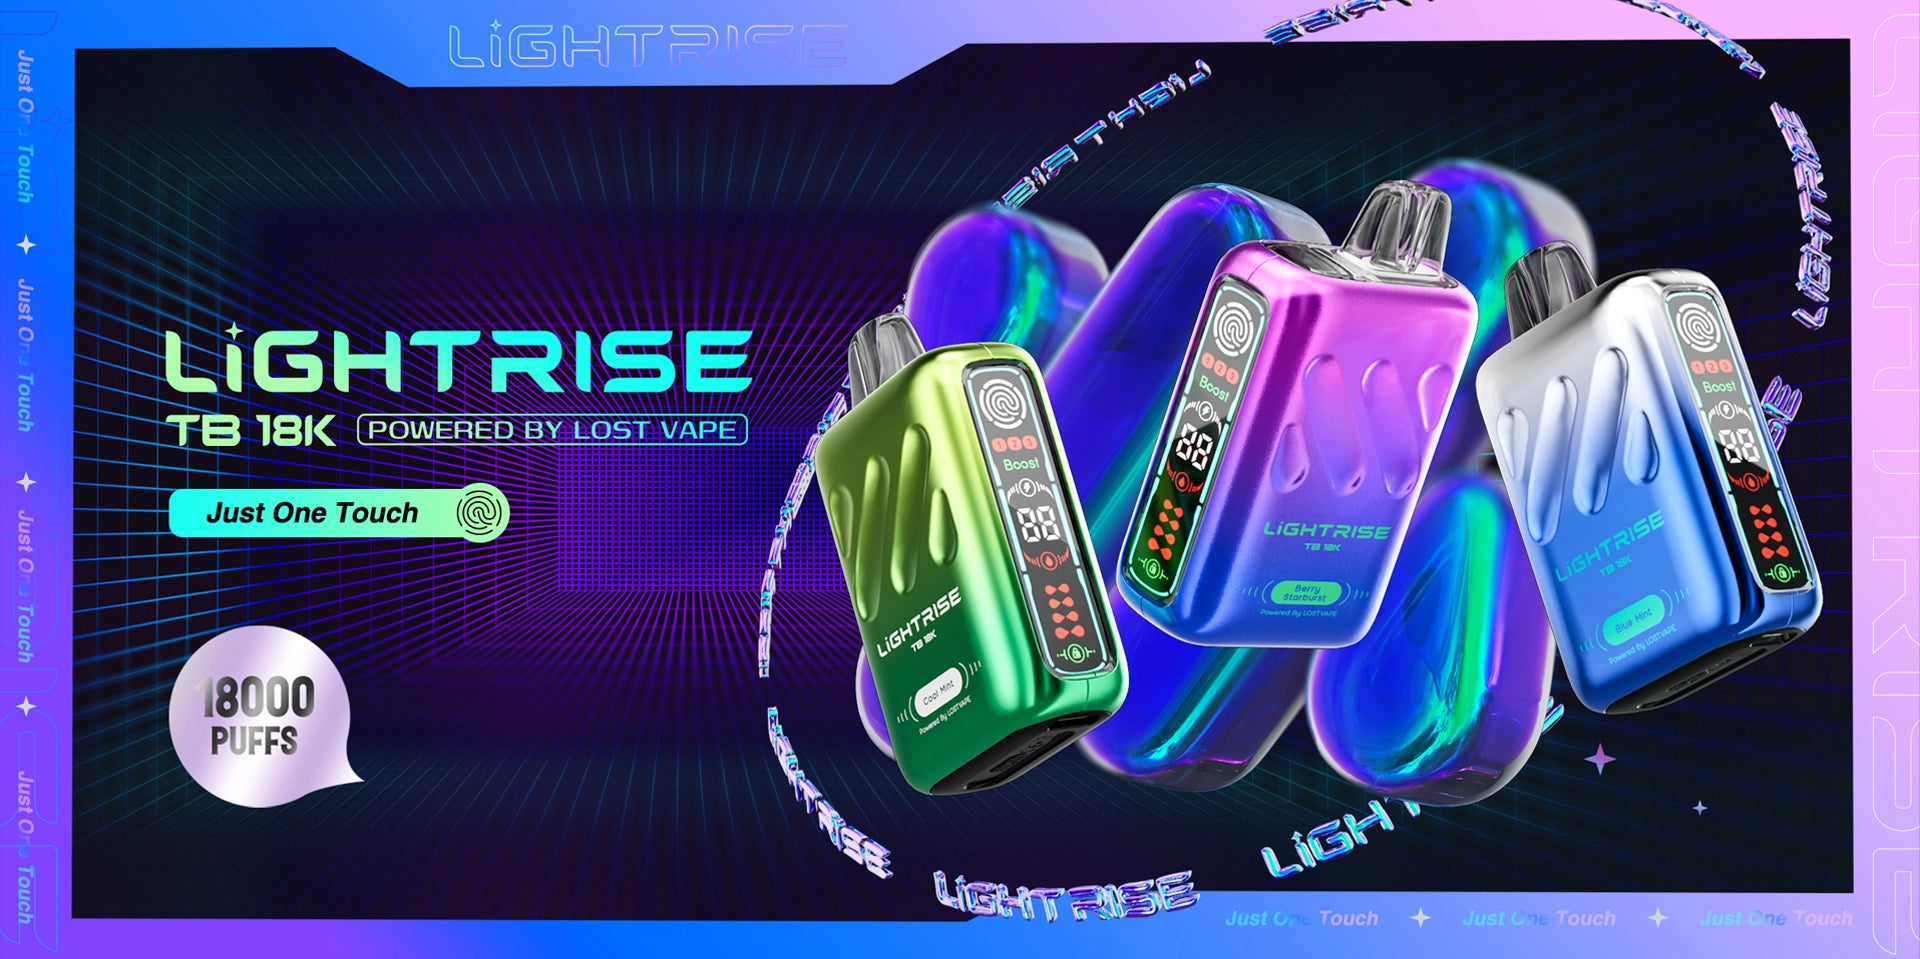 LIGHTRISE TB18K by LOST VAPE REVIEW: A TOUCH OF MORE JOY, MORE PUFFS!